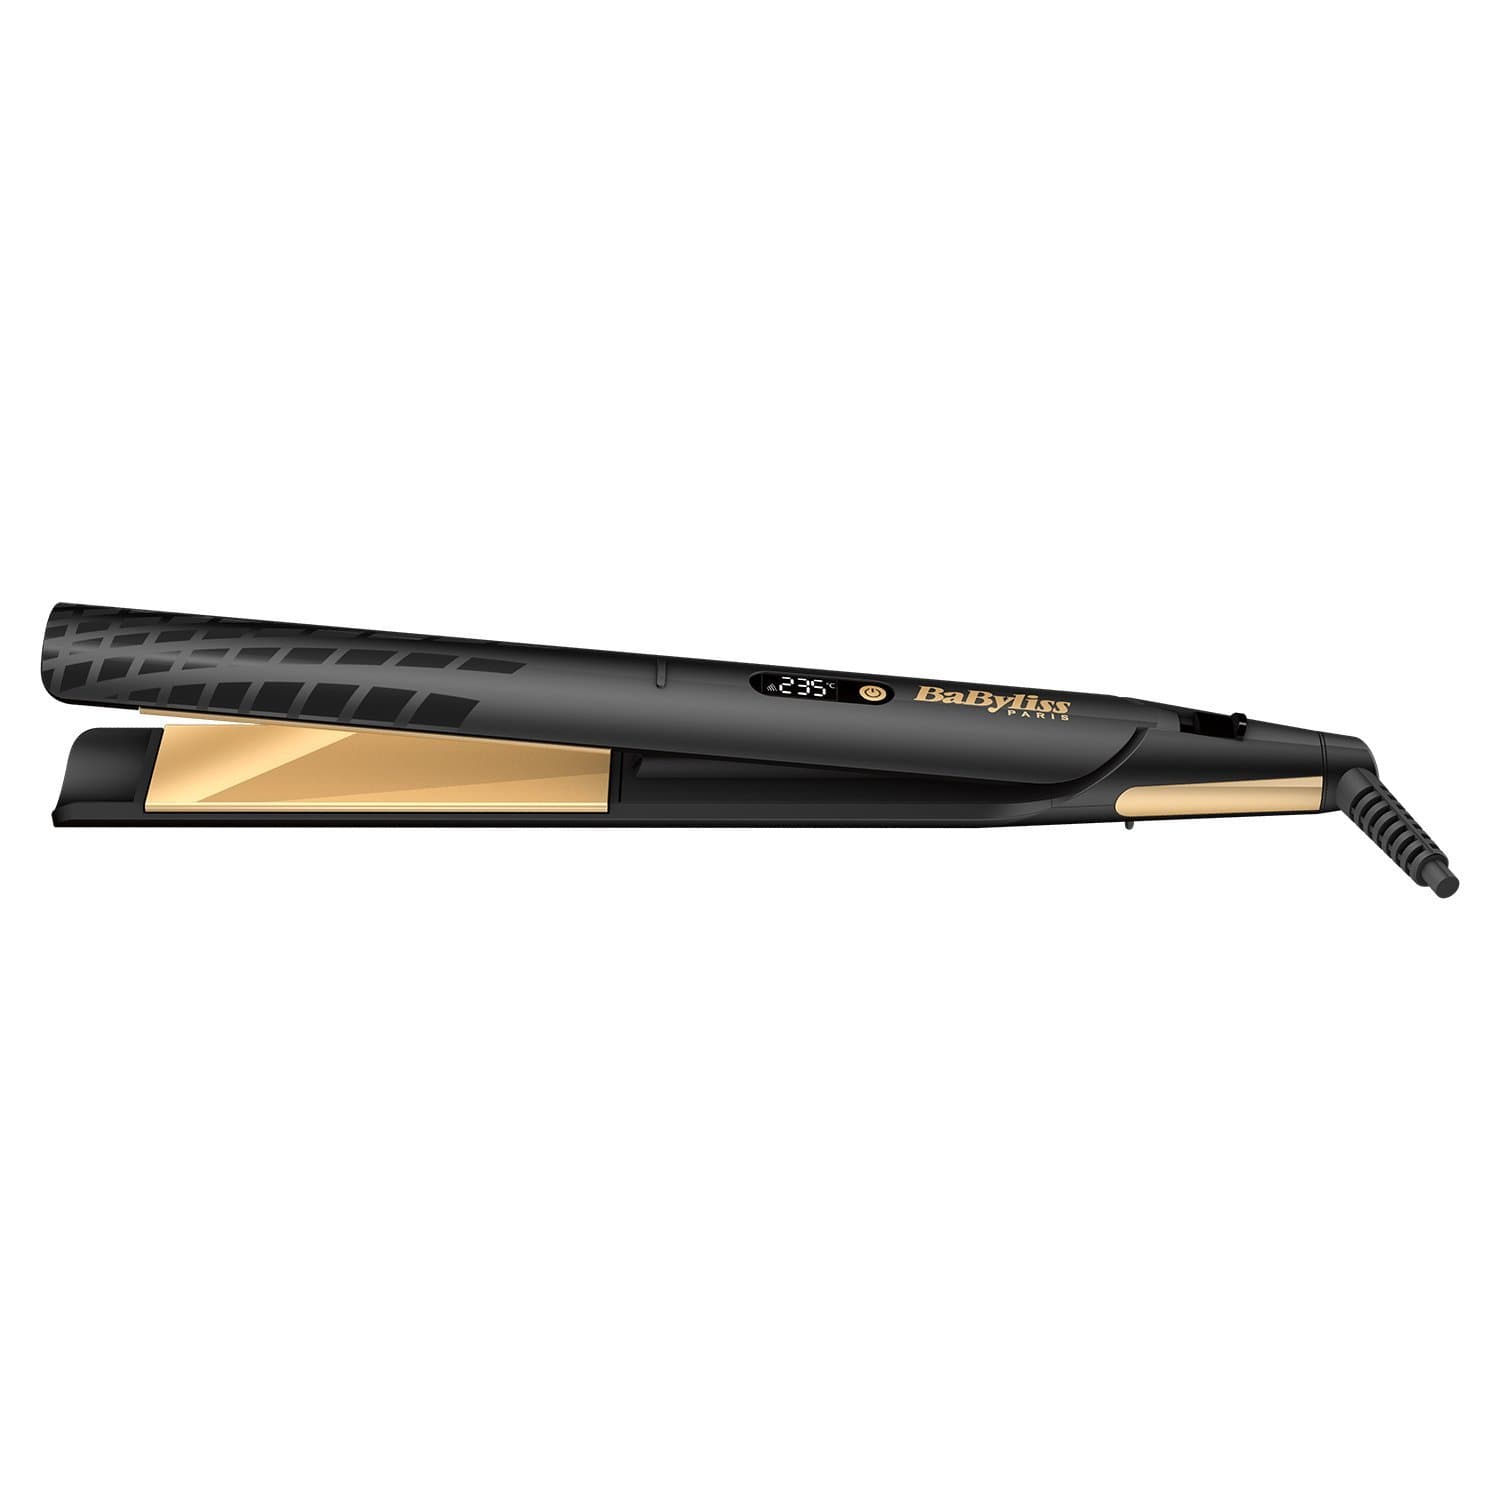 BABYLISS STRAIGHTENER 35MM GOLD 3 TEMP LCD & 19MM CURLING IRON LCD BUNDLE - ST430SDE+C519SDE